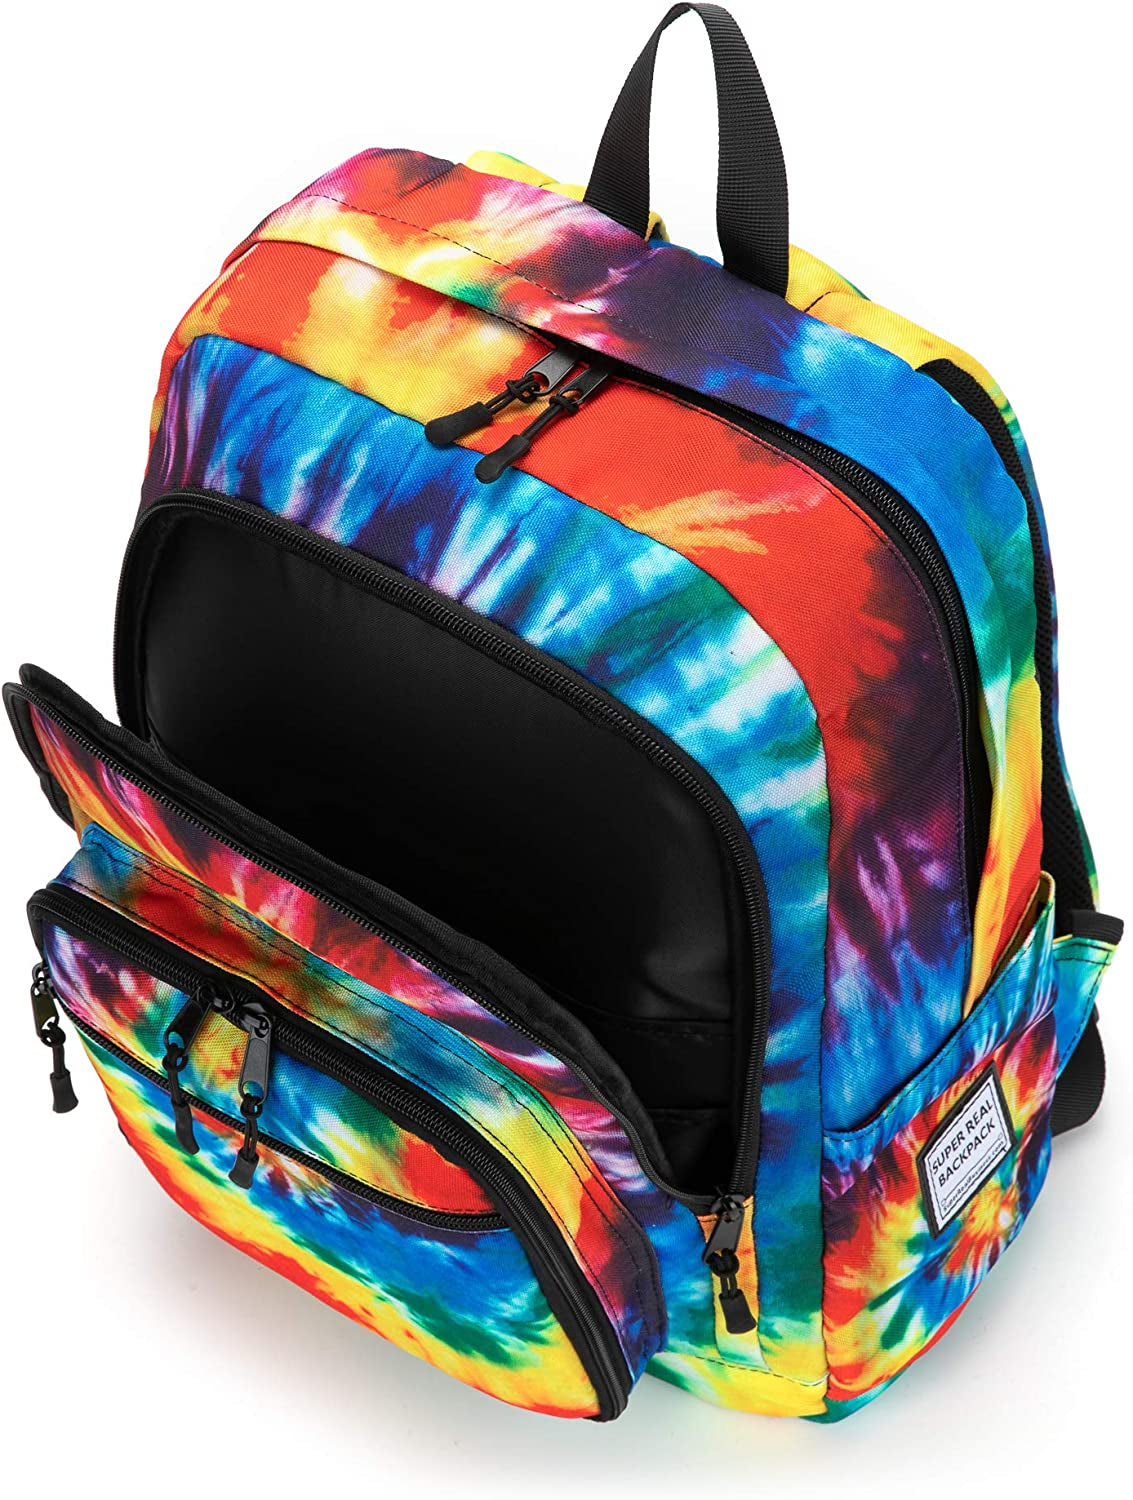 Bluetooth Speaker Backpack with 20-Watt Speakers & Subwoofer for Parties/Festivals/Beach/School. Rechargeable, Works with Iphone & Android (Tie Dye, 2022 Edition)